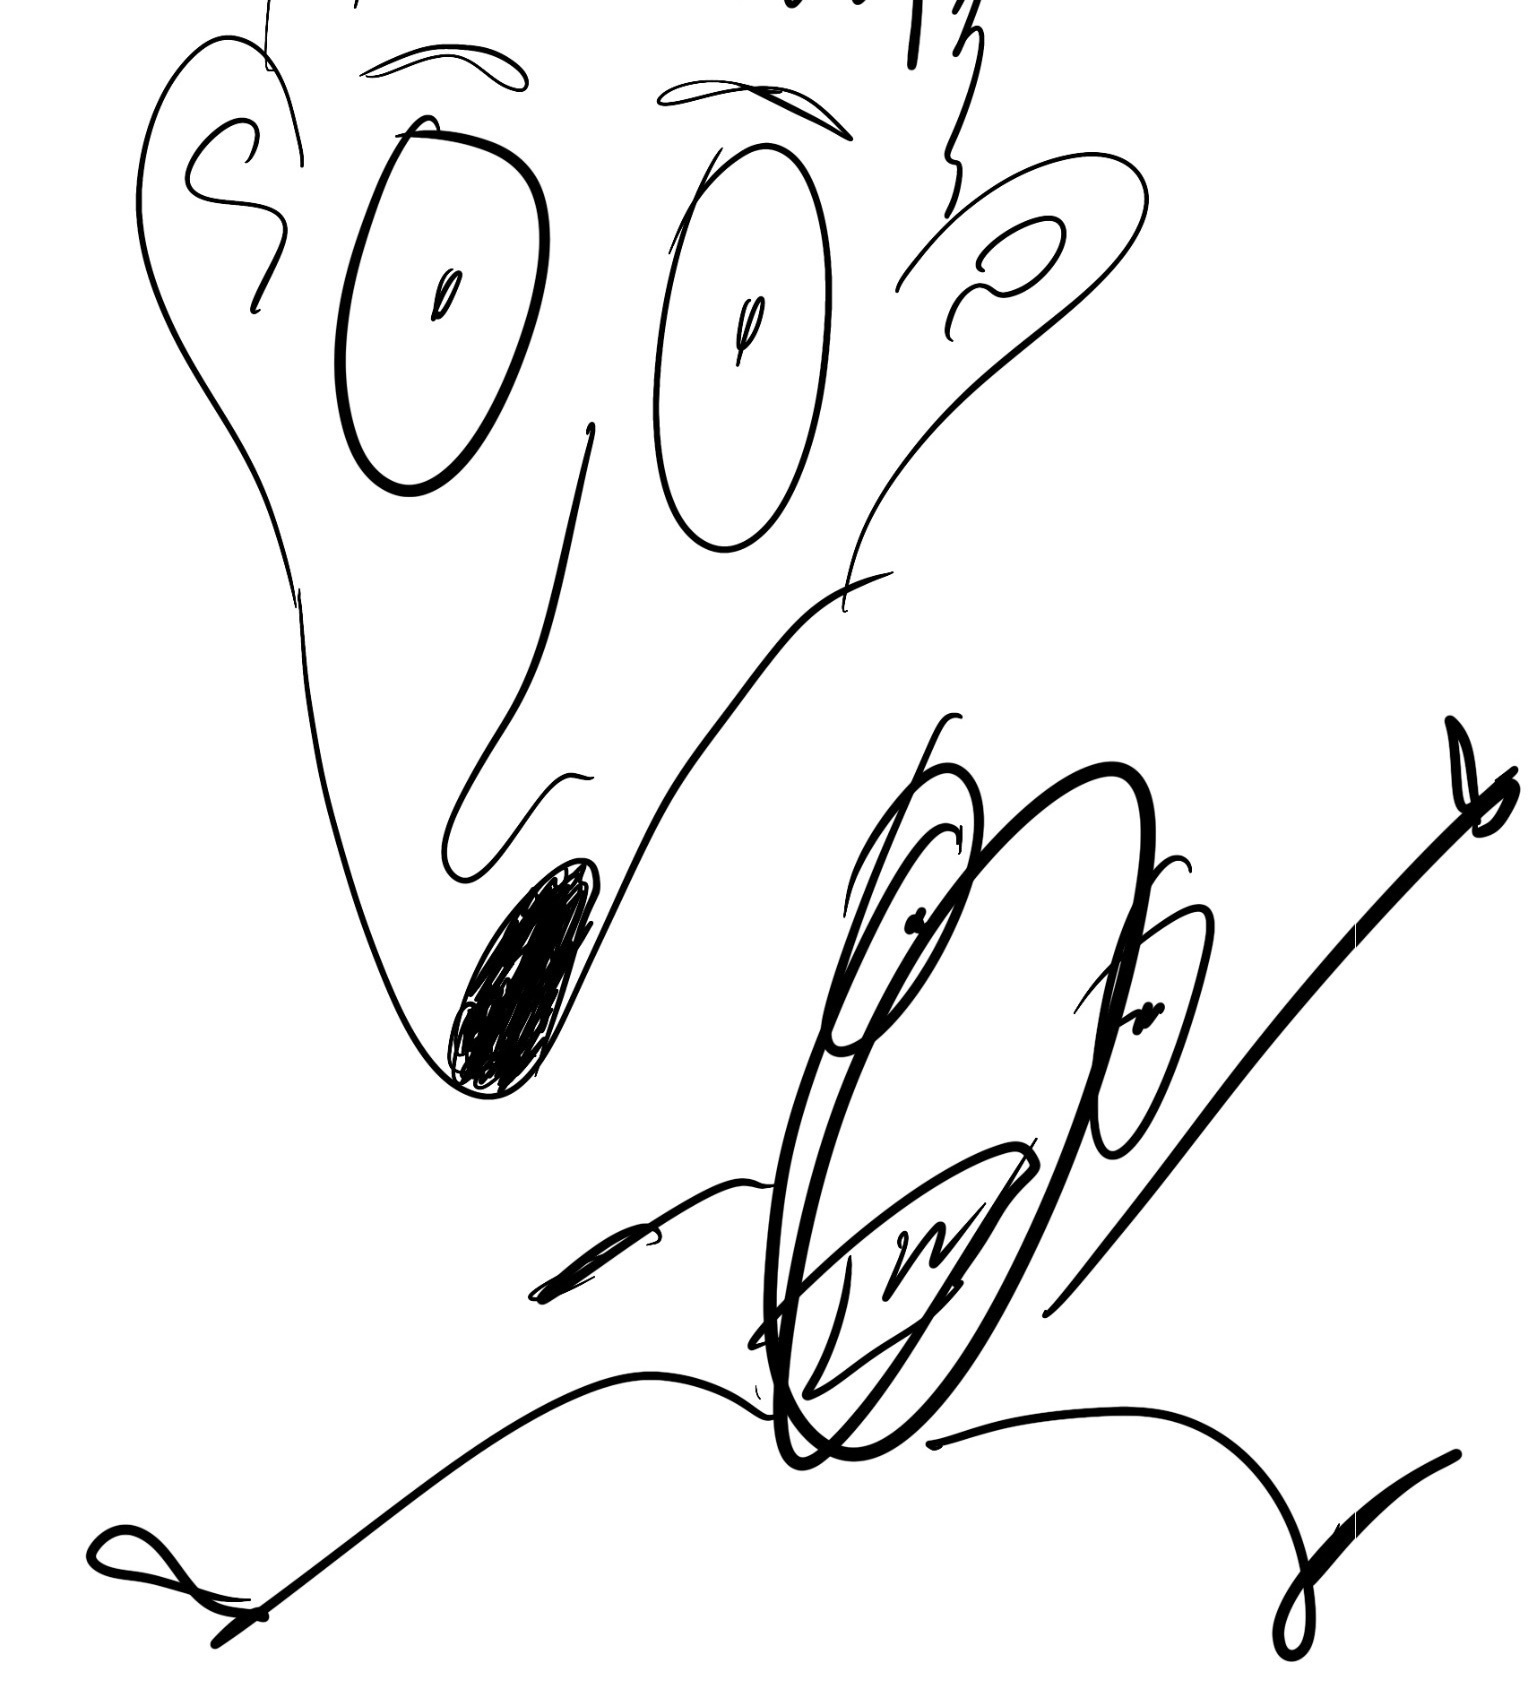 An abstract drawn character pointing out